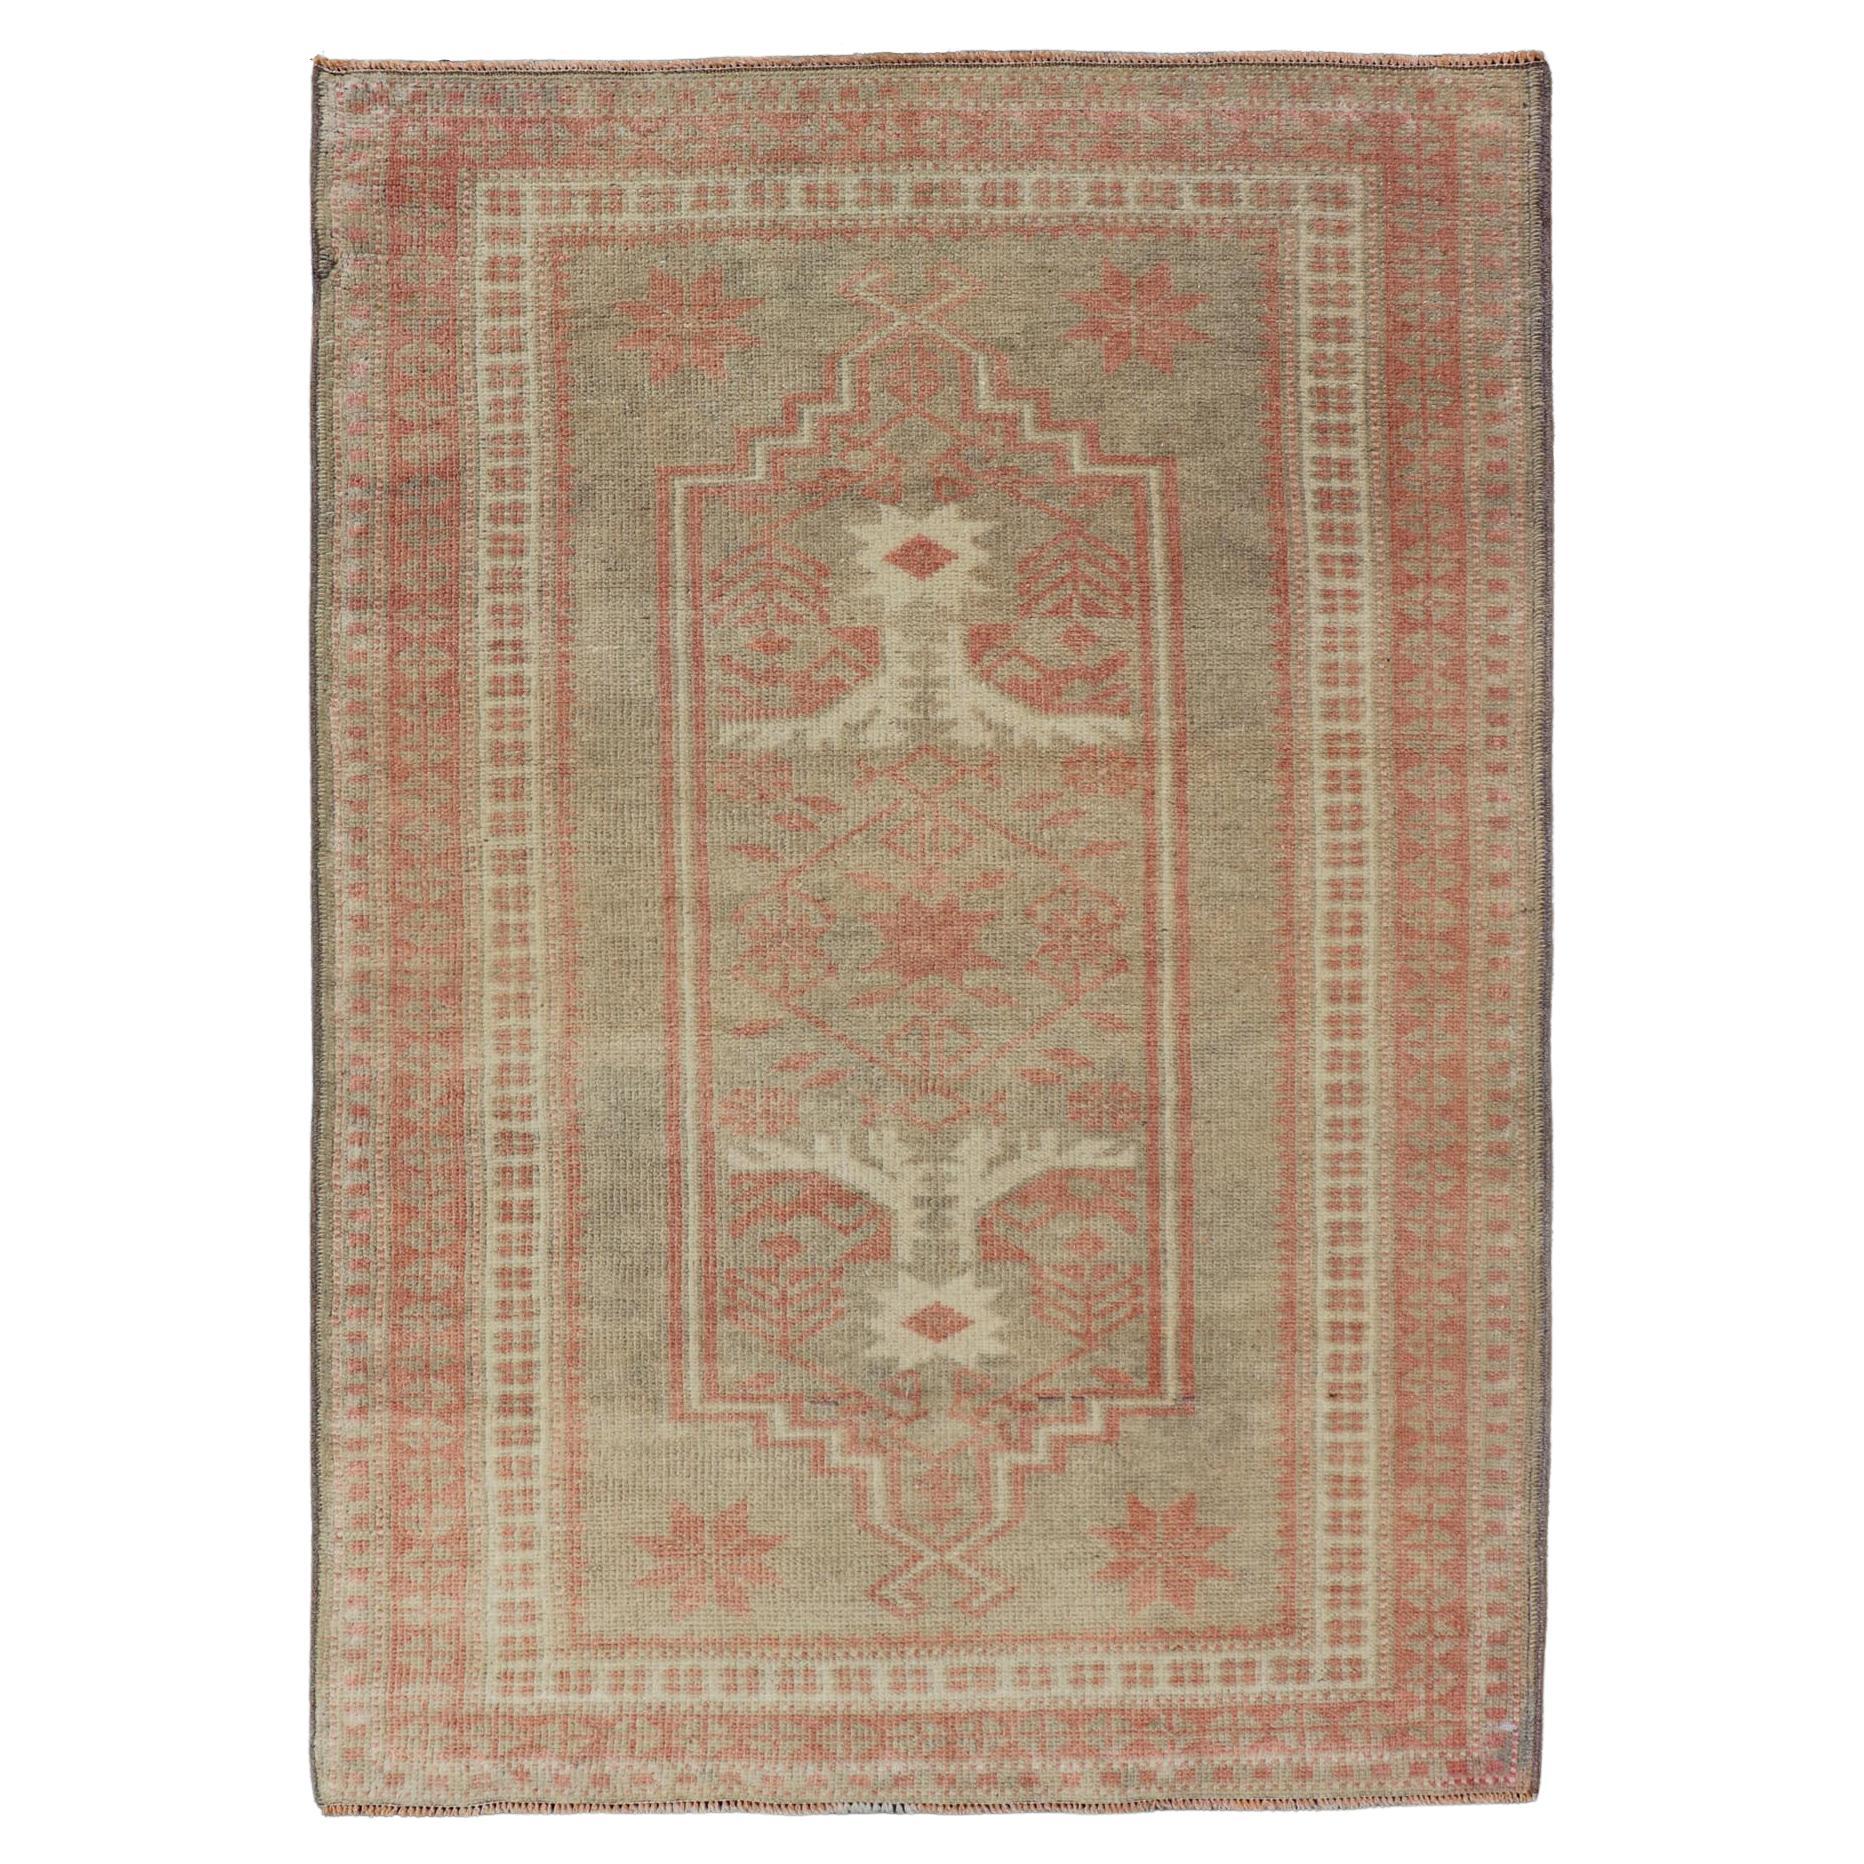 Vintage Turkish Oushak Rug with Geometric Design in Soft Red, and Light Green 